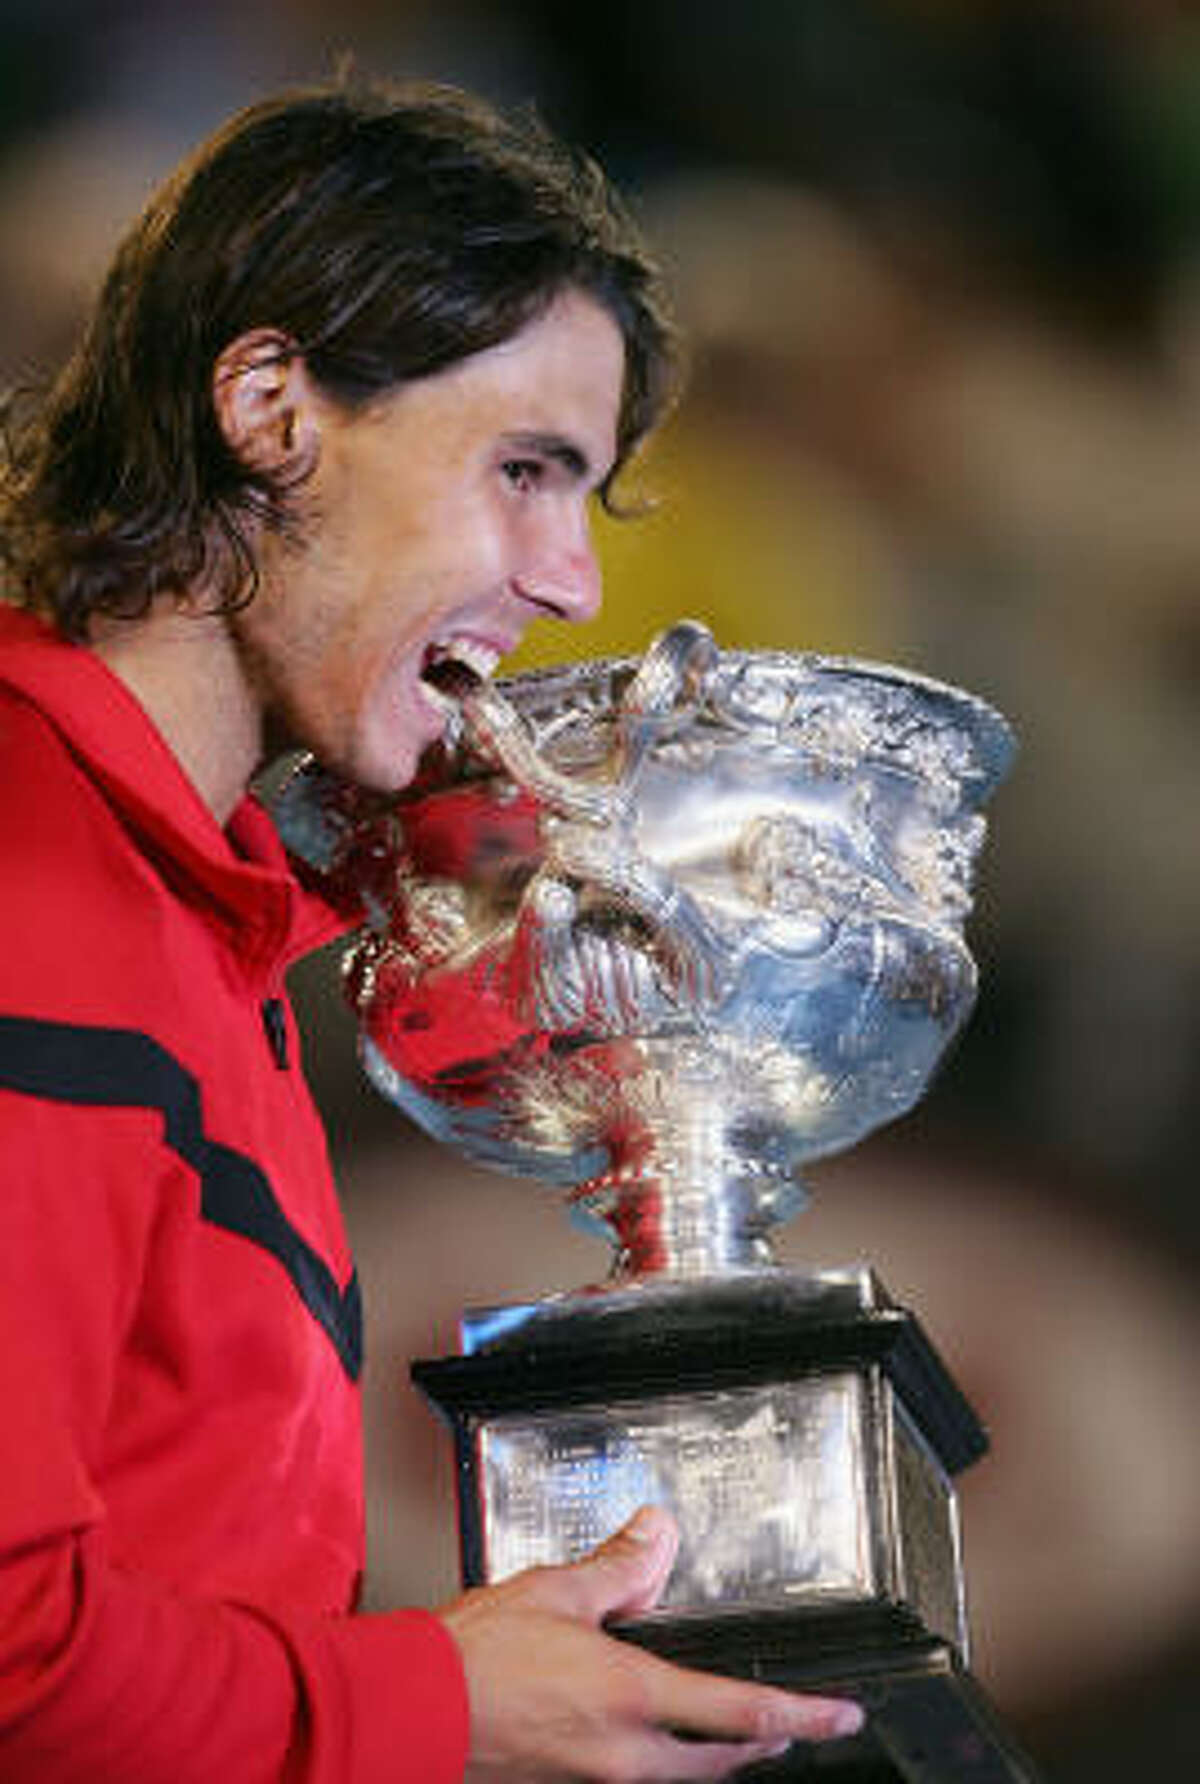 February 1, Rafael Nadal defeats Roger Federer in men's final Rafael Nadal poses with the Norman Brookes Challenge Cup after winning his men's final match against Roger Federer.